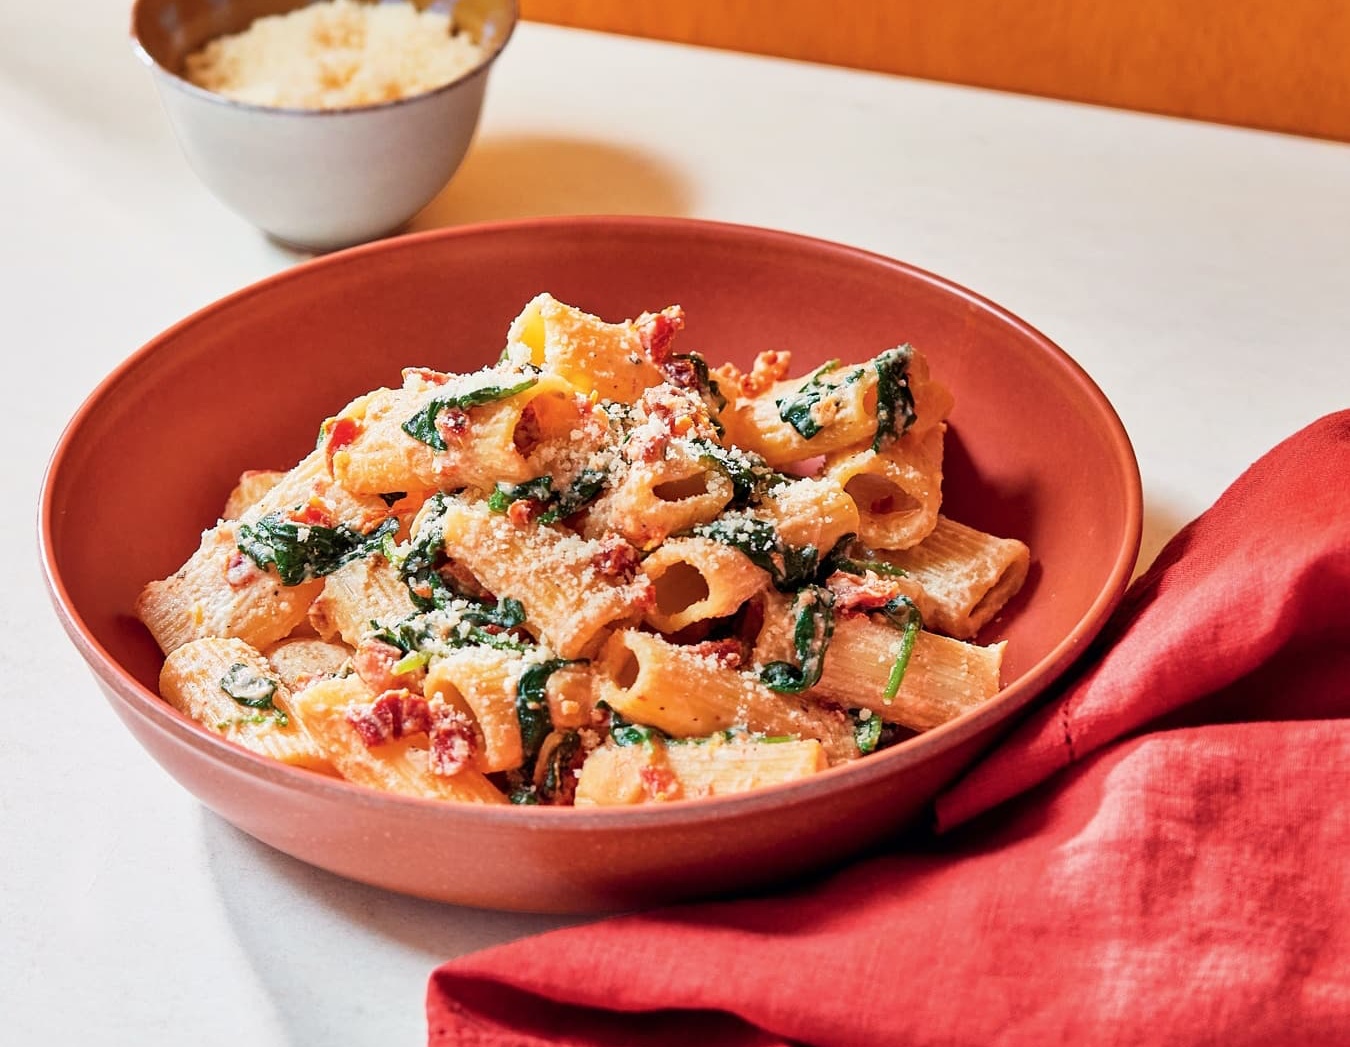 garlic-pasta-with-ricotta-and-sun-dried-tomatoes2-0723